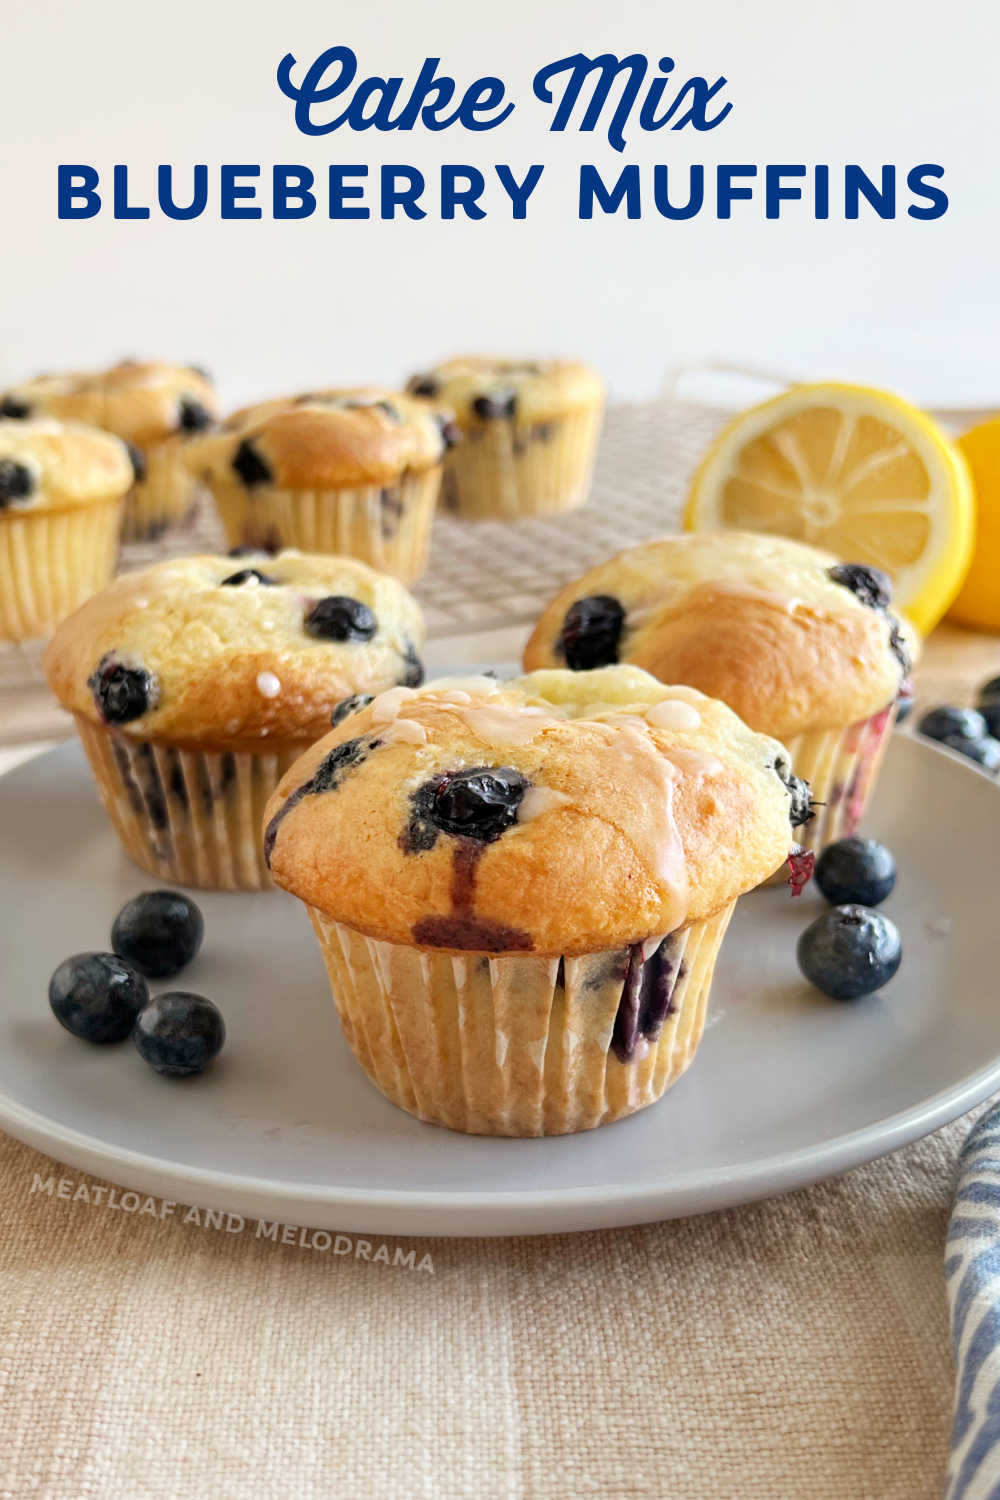 Make Cake Mix Blueberry Muffins with a box of cake mix and fresh blueberries plus a few other ingredients. An easy blueberry muffin recipe everyone loves. These delicious muffins are perfect for a quick breakfast or snack! via @meamel